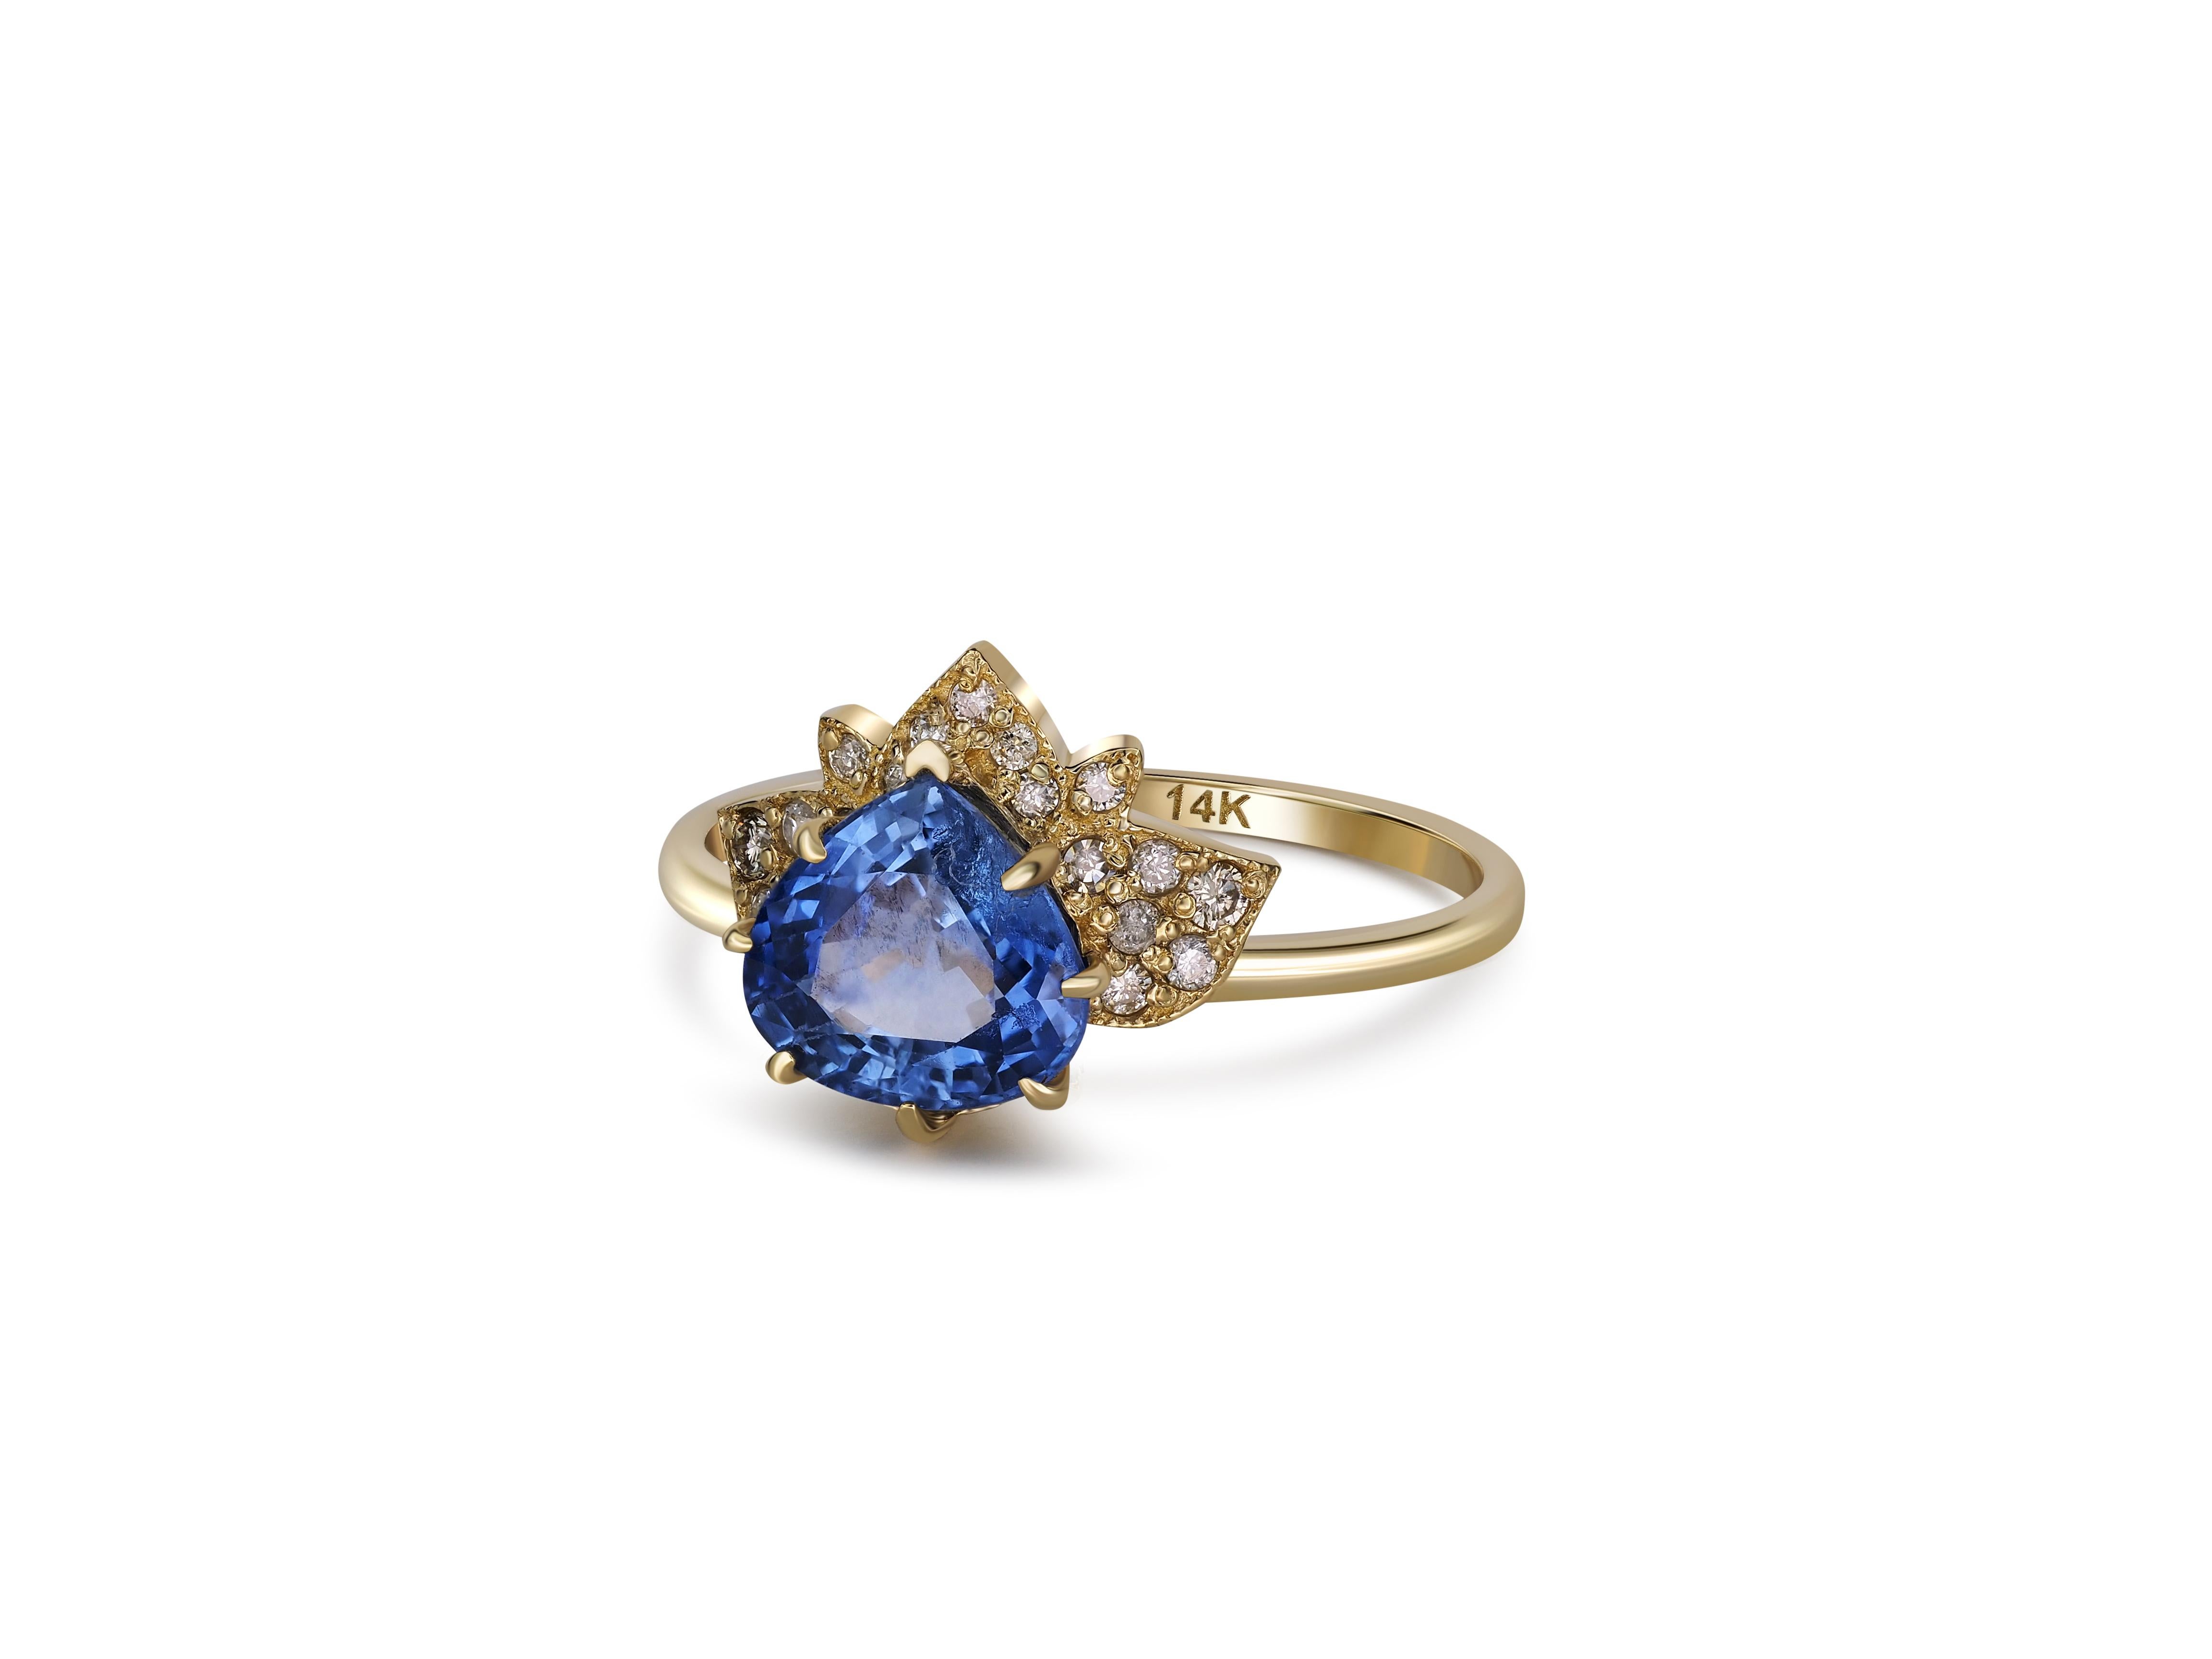 Women's or Men's Pear Sapphire Ring, Lotus Ring with Sapphire, Certified Shri Lanka Sapphire Ring